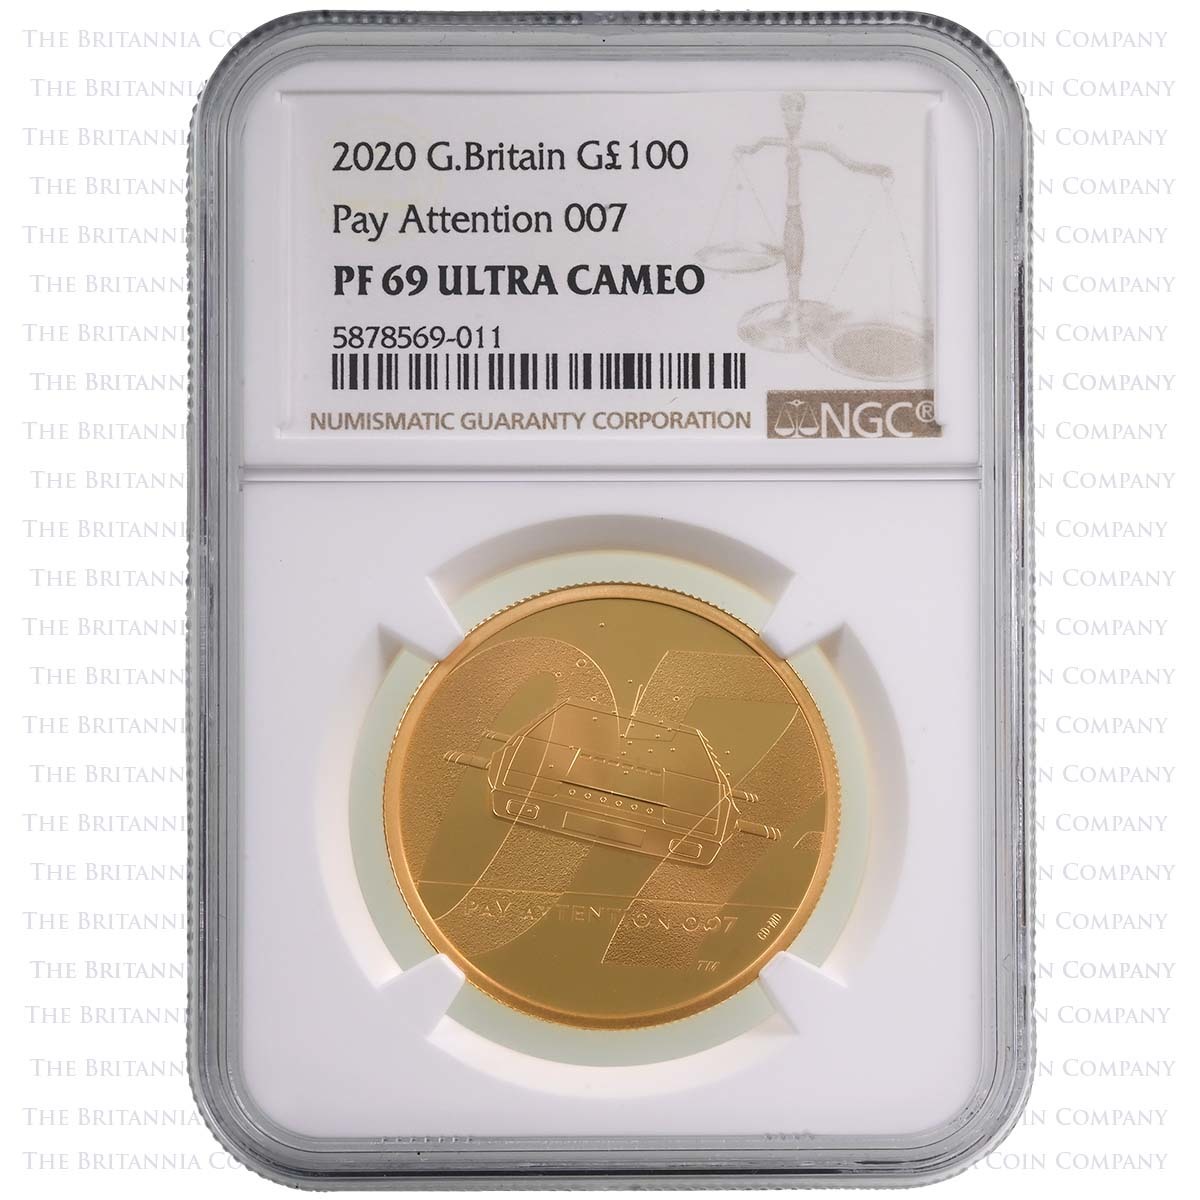 UK20B2GP 2020 Pay Attention 007 James Bond One Ounce Gold Proof Coin NGC Graded PF 69 Ultra Cameo Holder